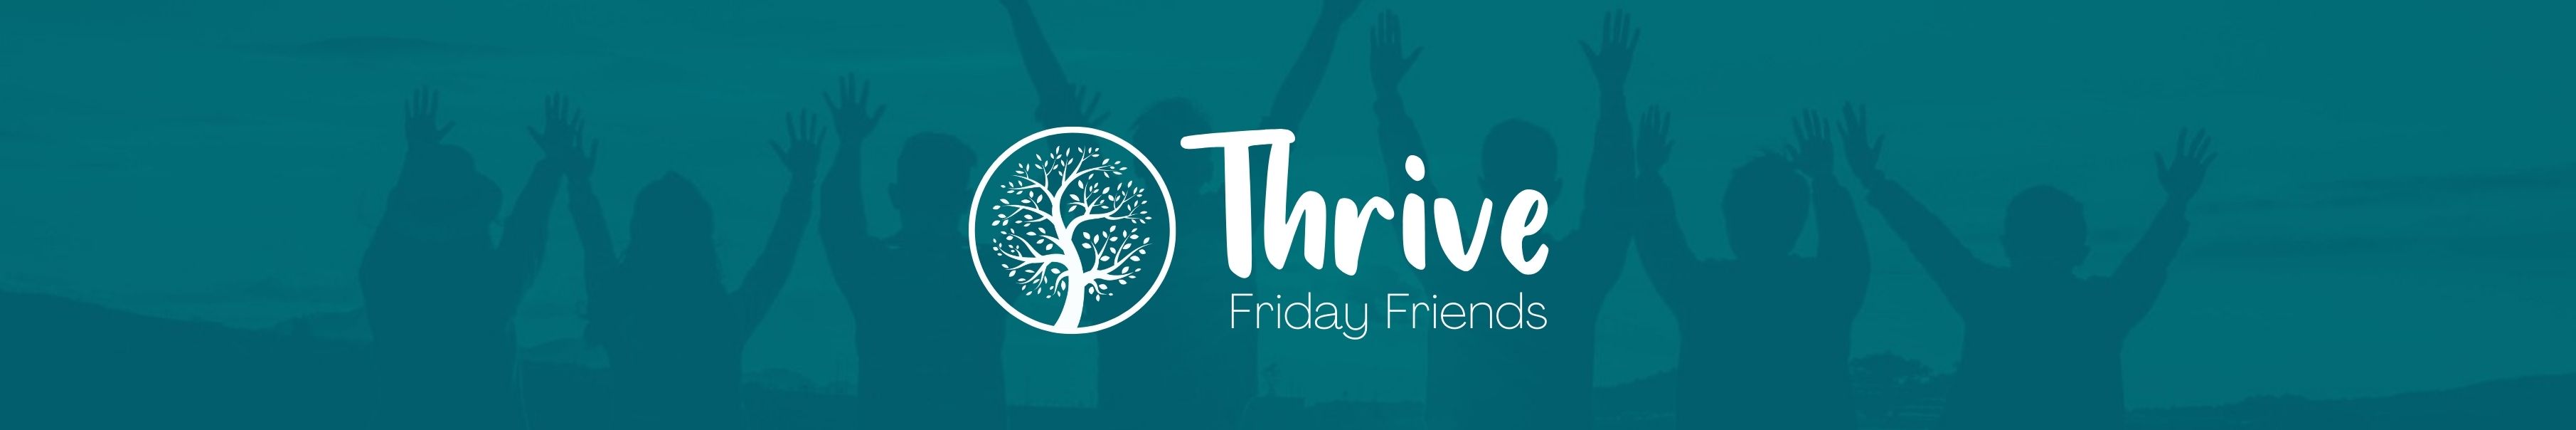 Thrive Friday Friends